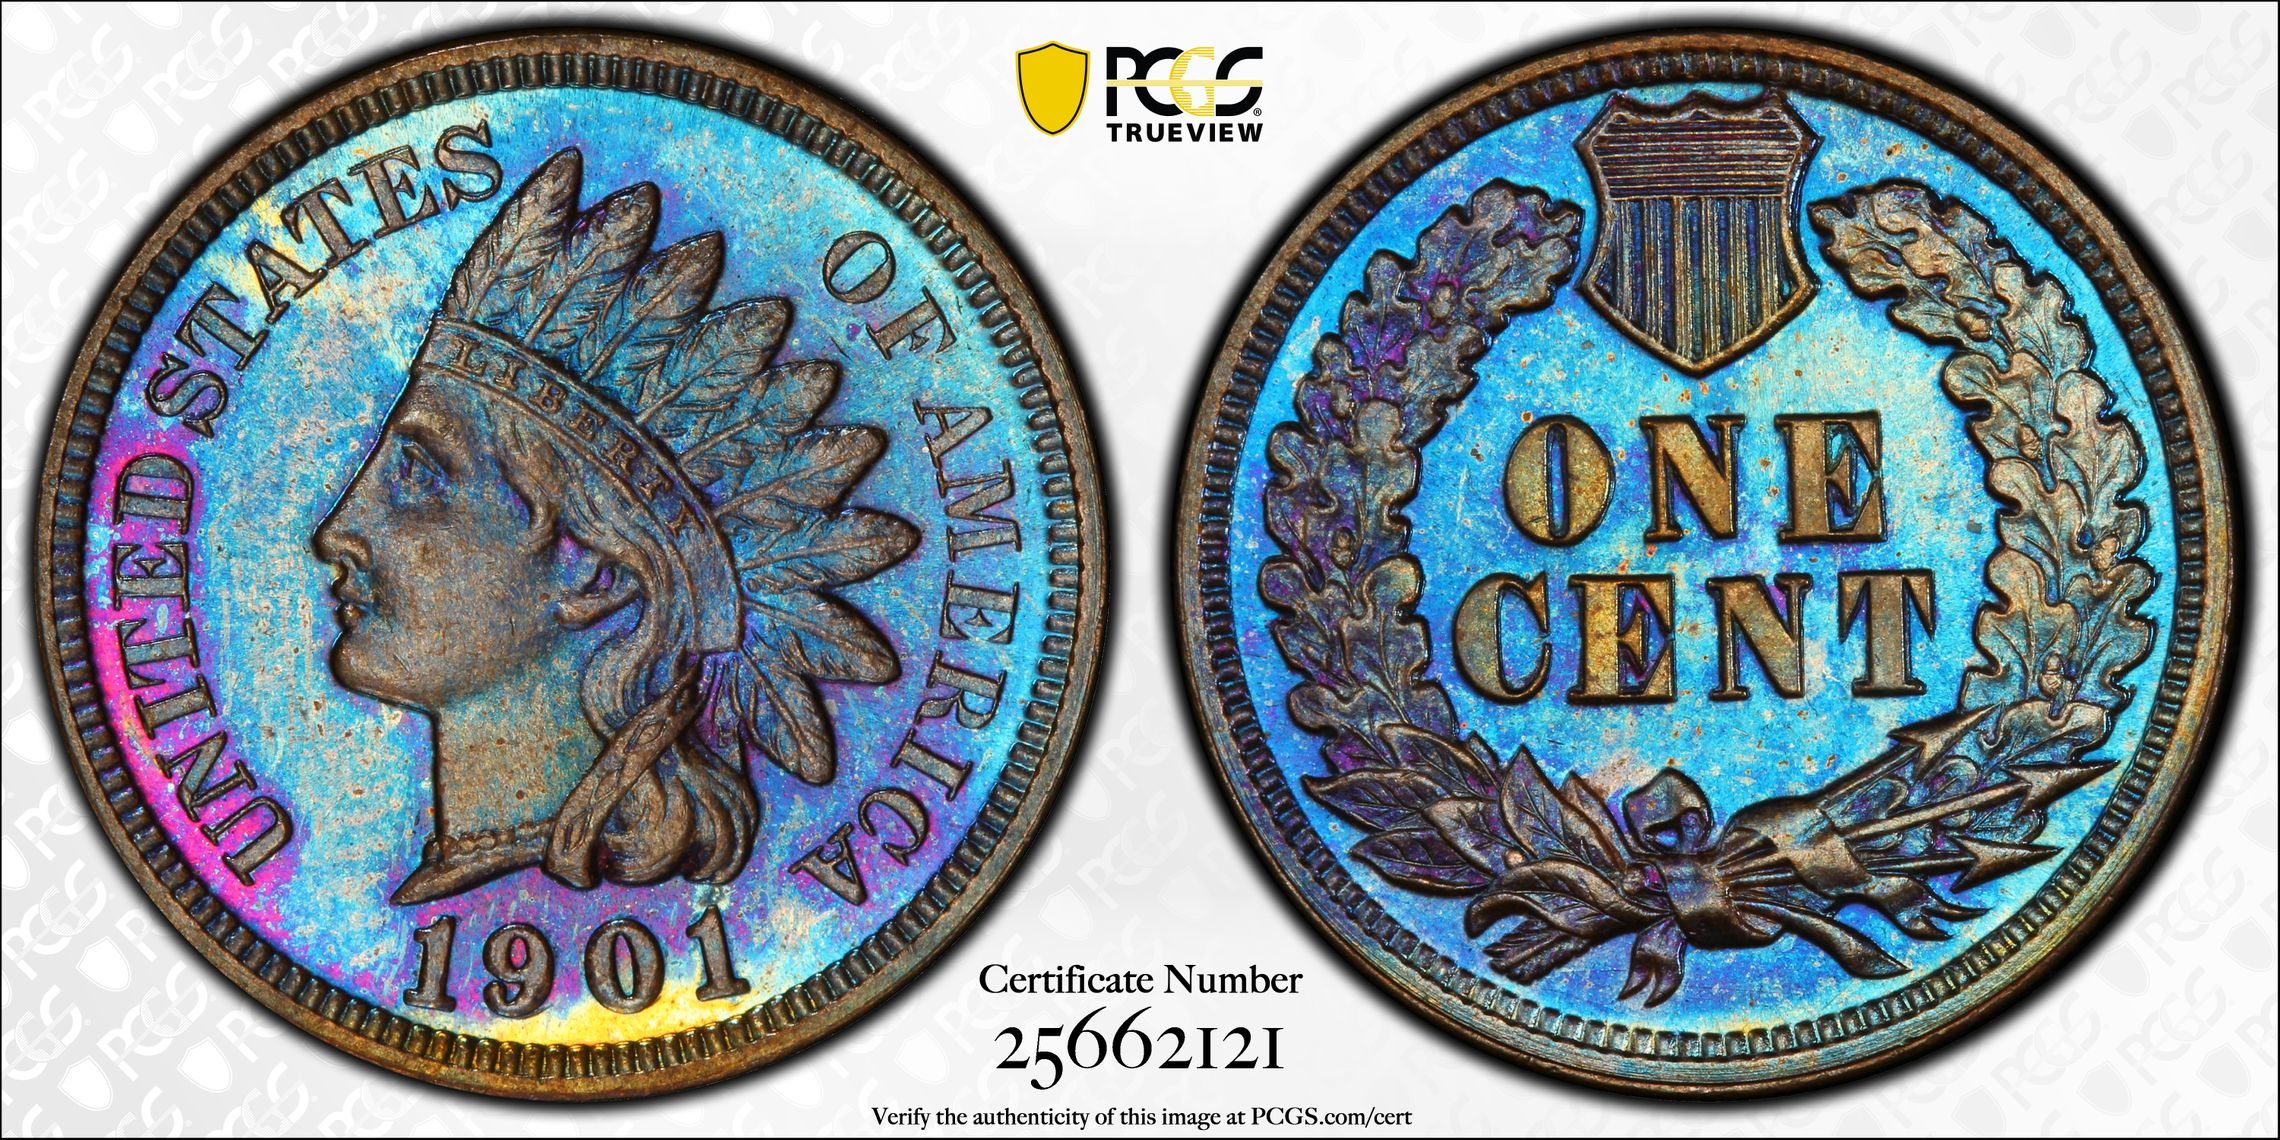 1901 1C Indian Cent PCGS PF66BN - Toned - The Penny Lady®